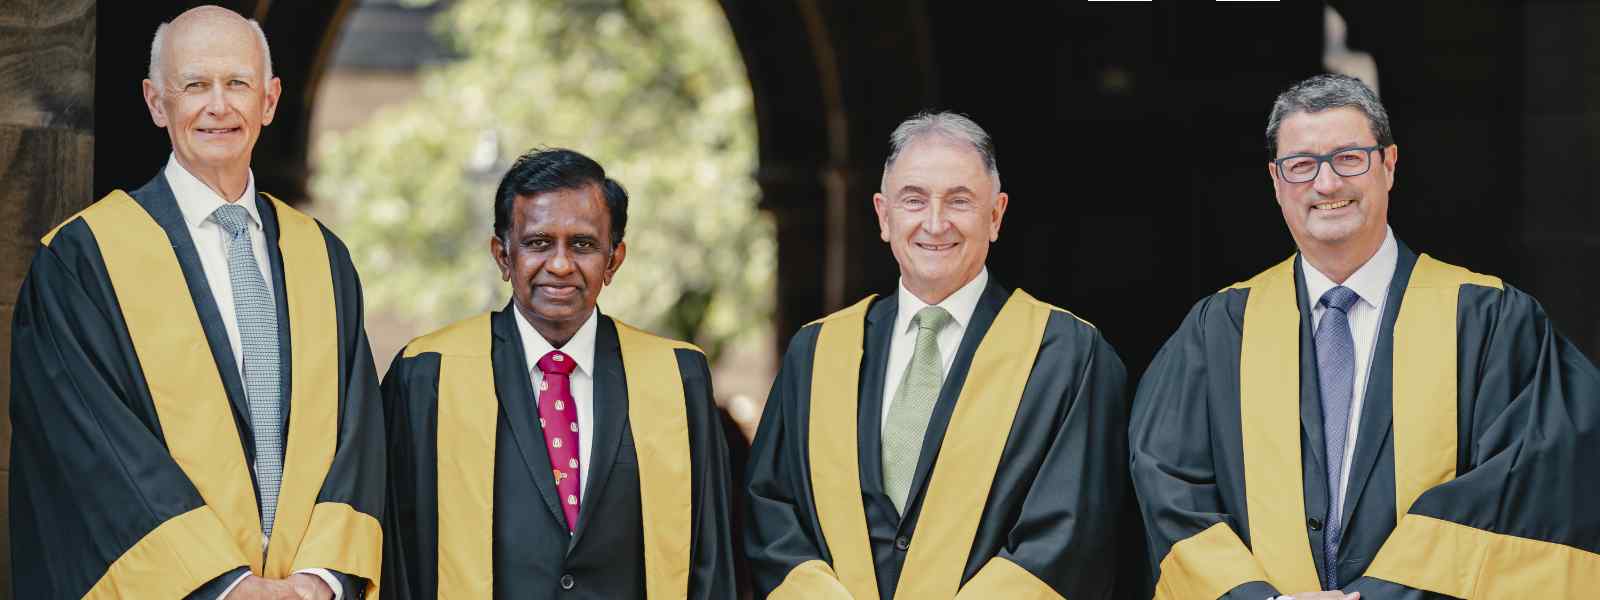 Professor Sir Jim McDonald and other new Honorary Fellows